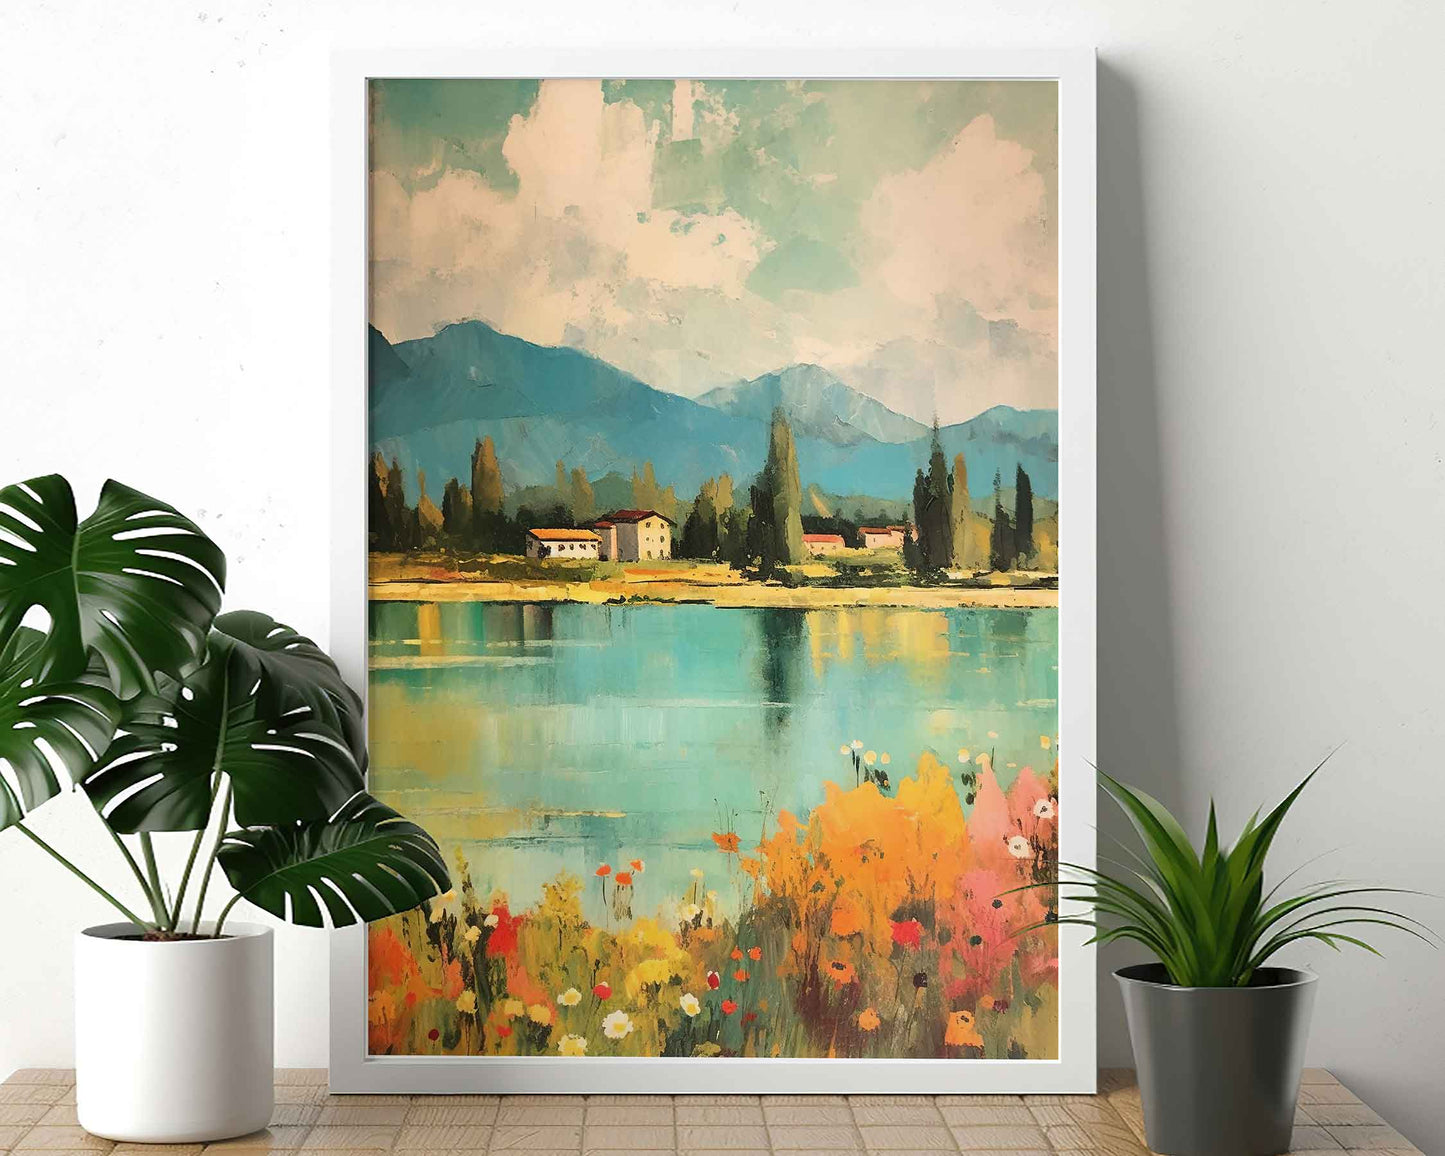 Framed Image of Italian Scenic Travel & Lifestyle Landscapes Wall Art Prints of Italy